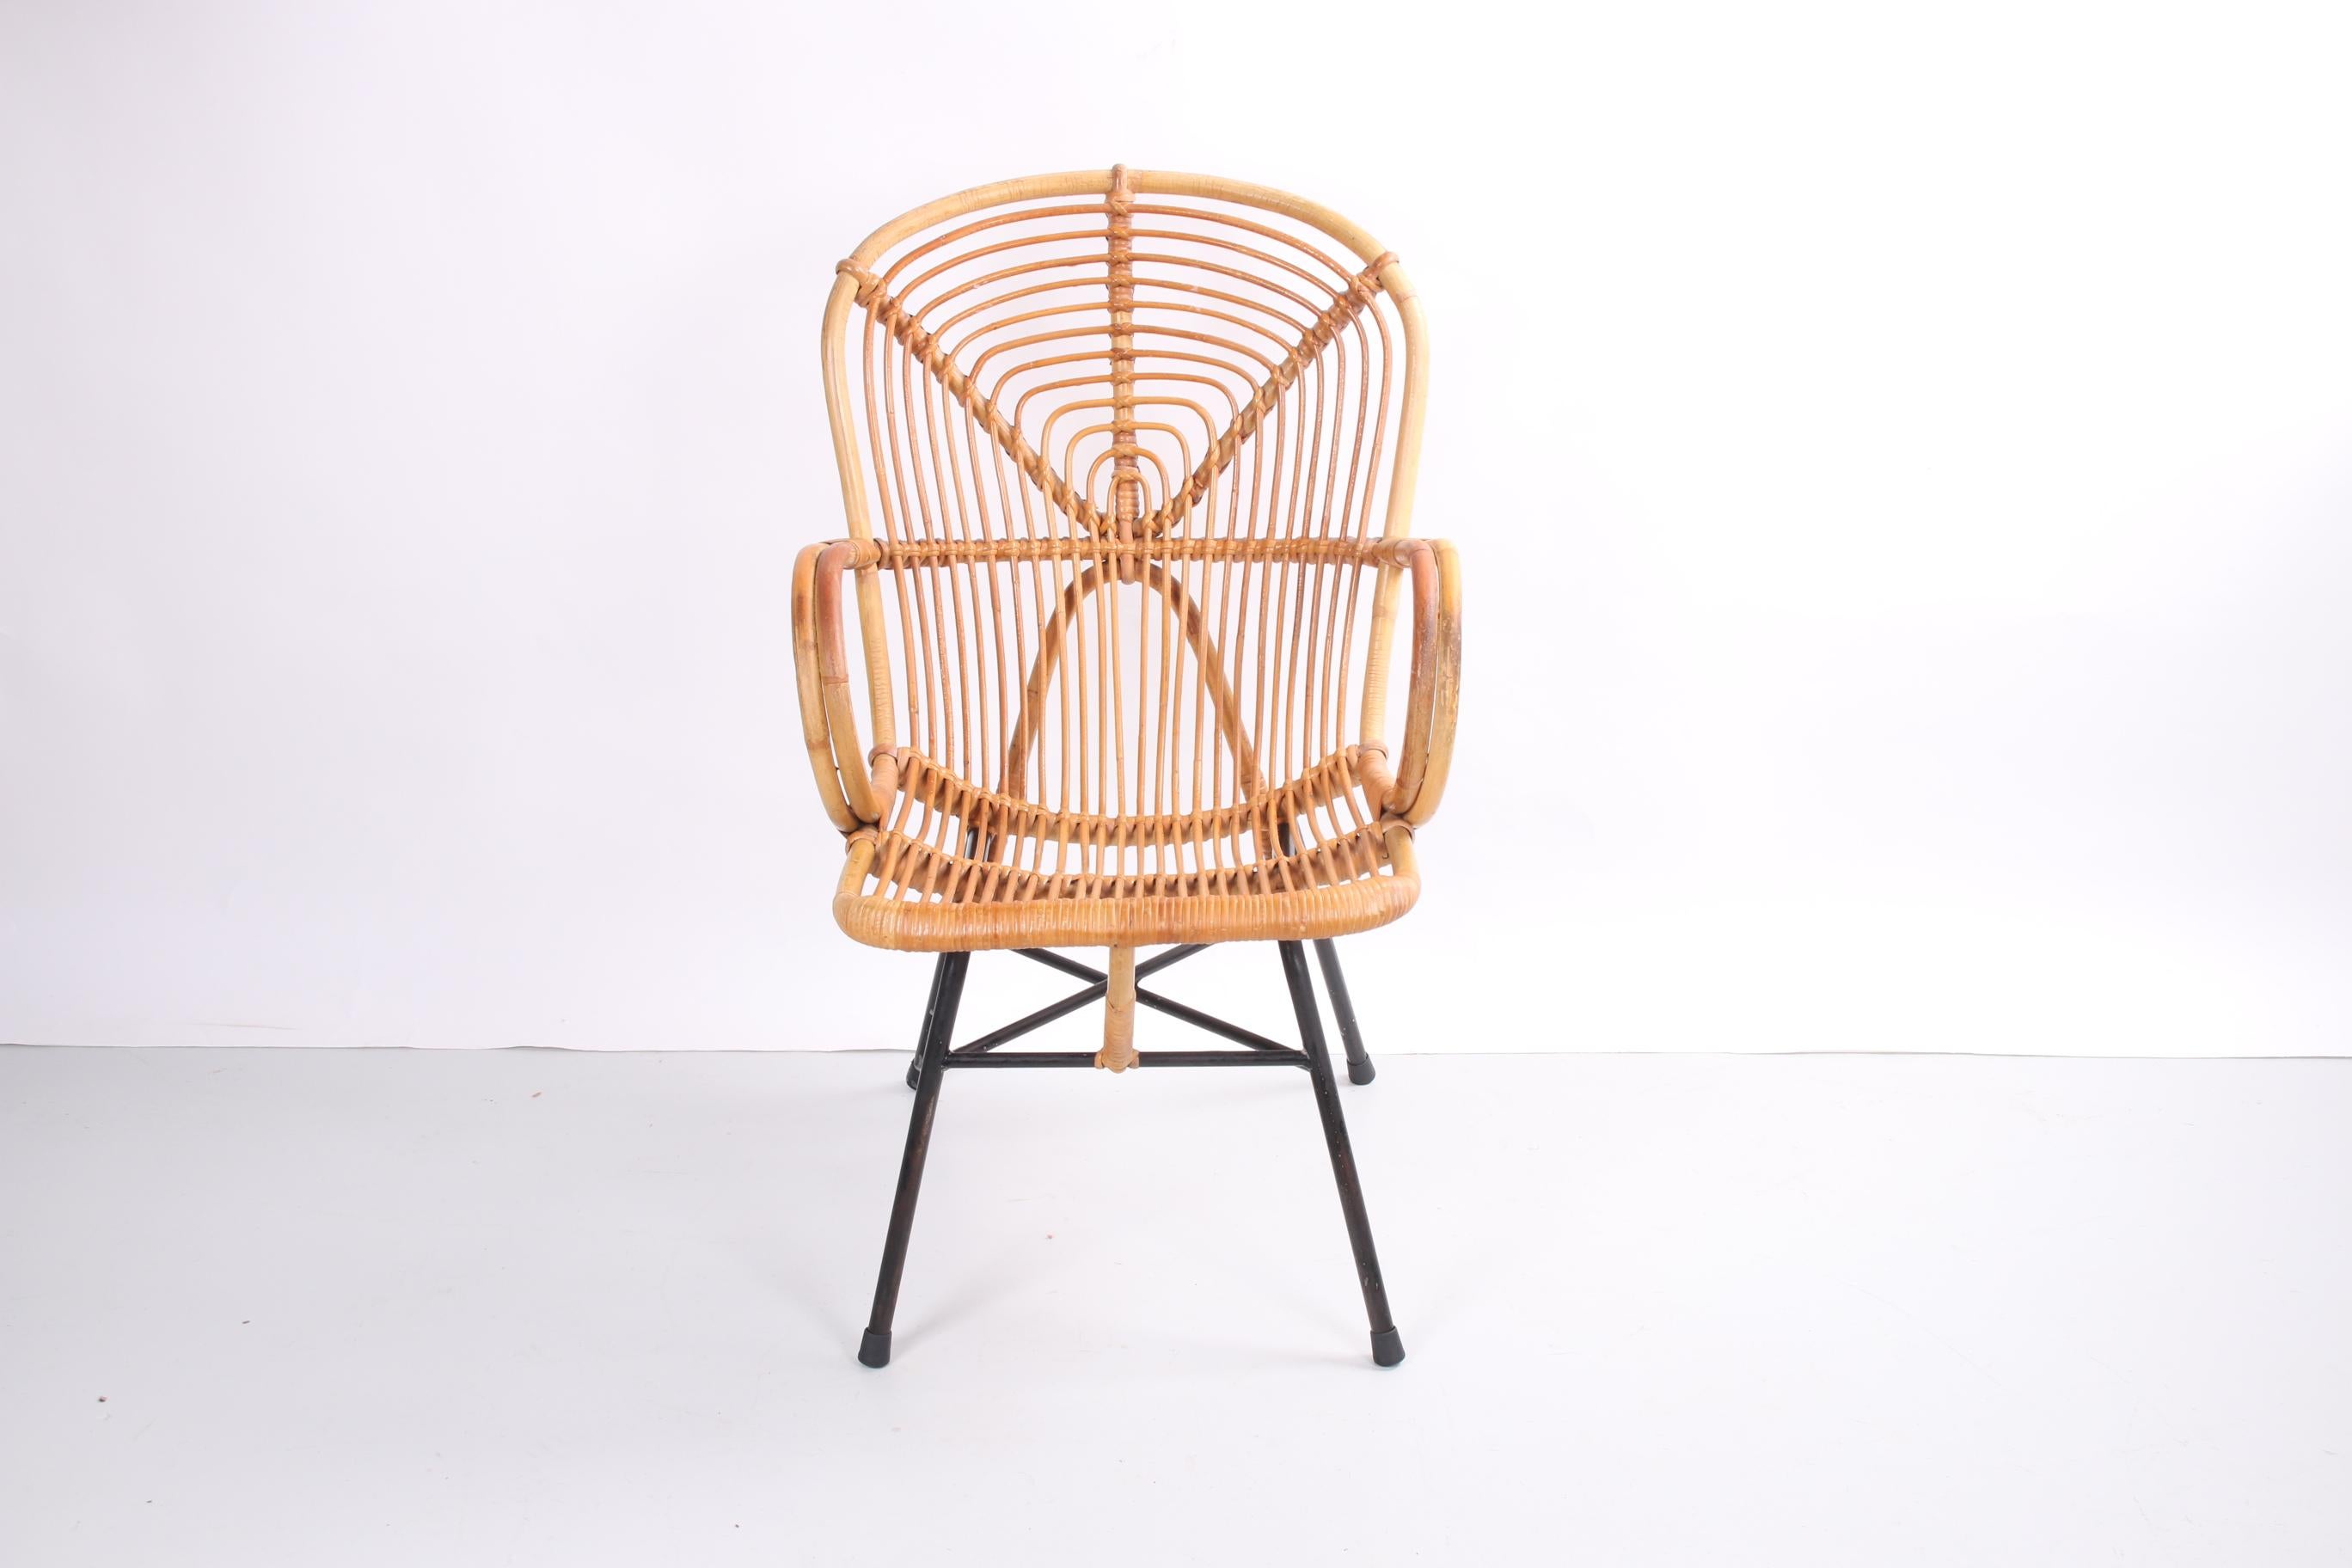 This beautiful bamboo lounge chair from Noordwolde fits perfectly into any interior. The chair was probably produced around the 1950s.

The black metal base gives the chair something cool and minimalist. Yet the chair with its hand-woven bamboo seat